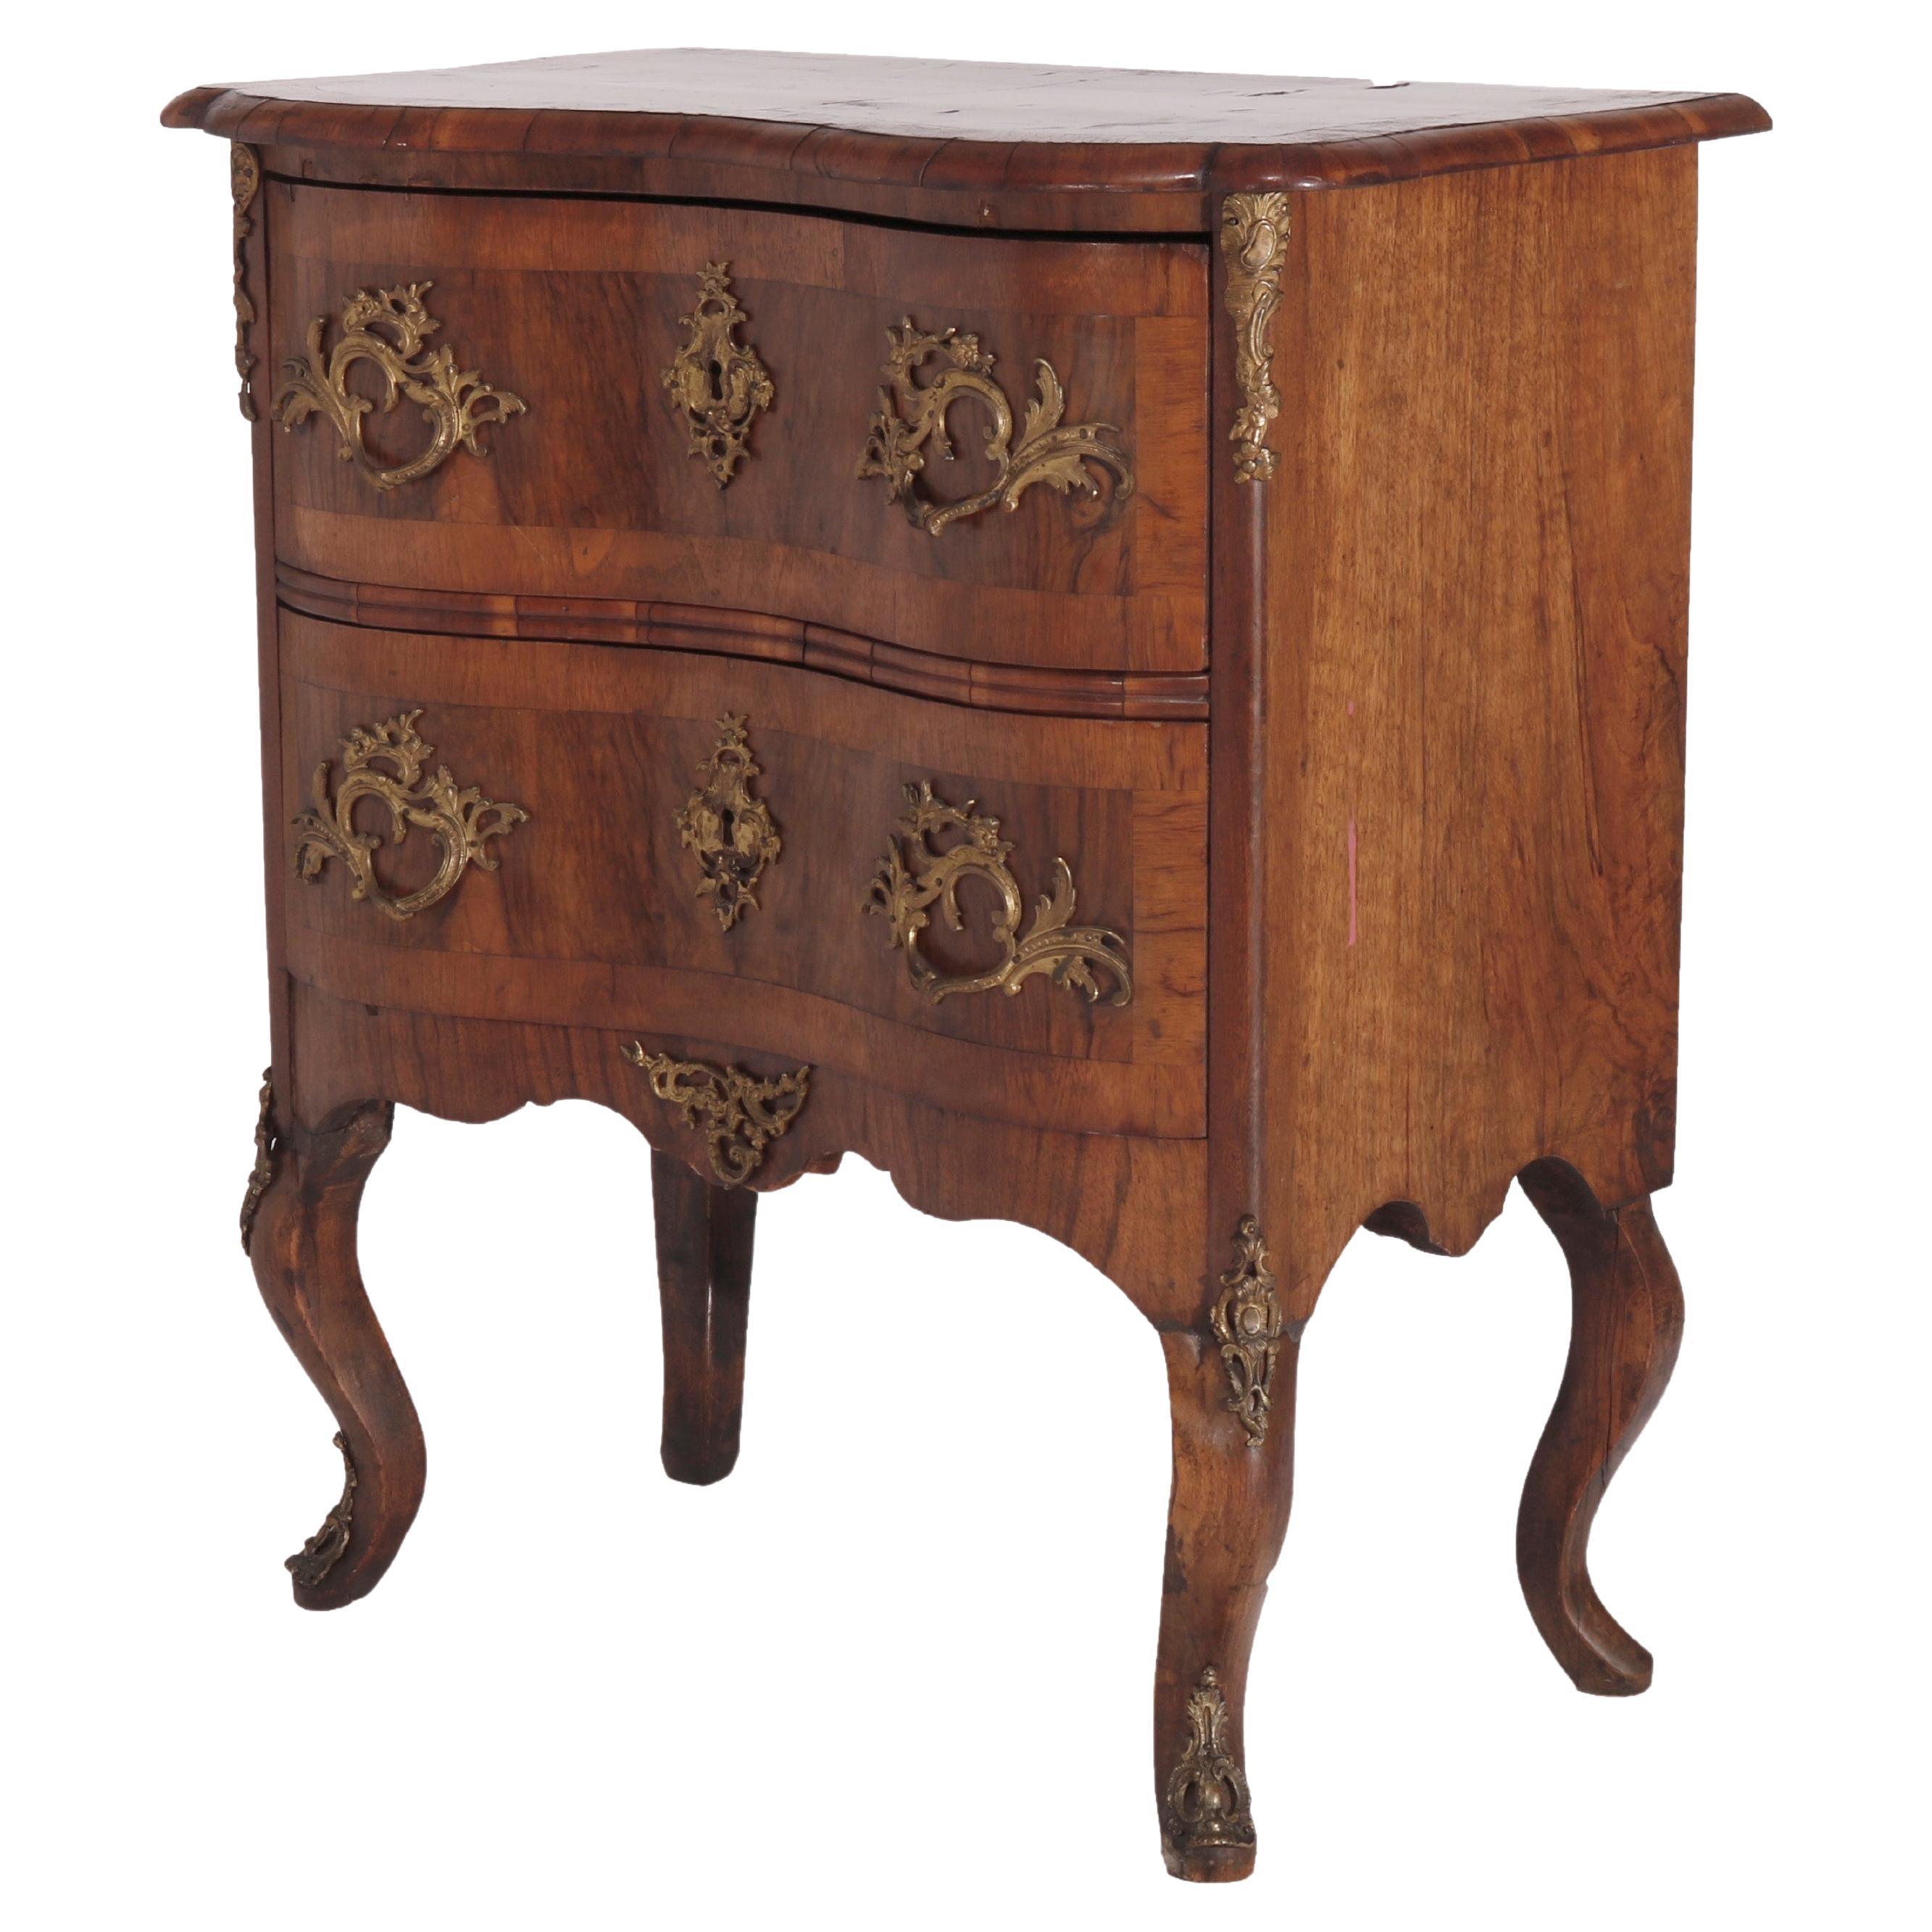  Antique Italian Kingwood, Satinwood & Burl Chest with Ormolu Mounts Late 18th C For Sale